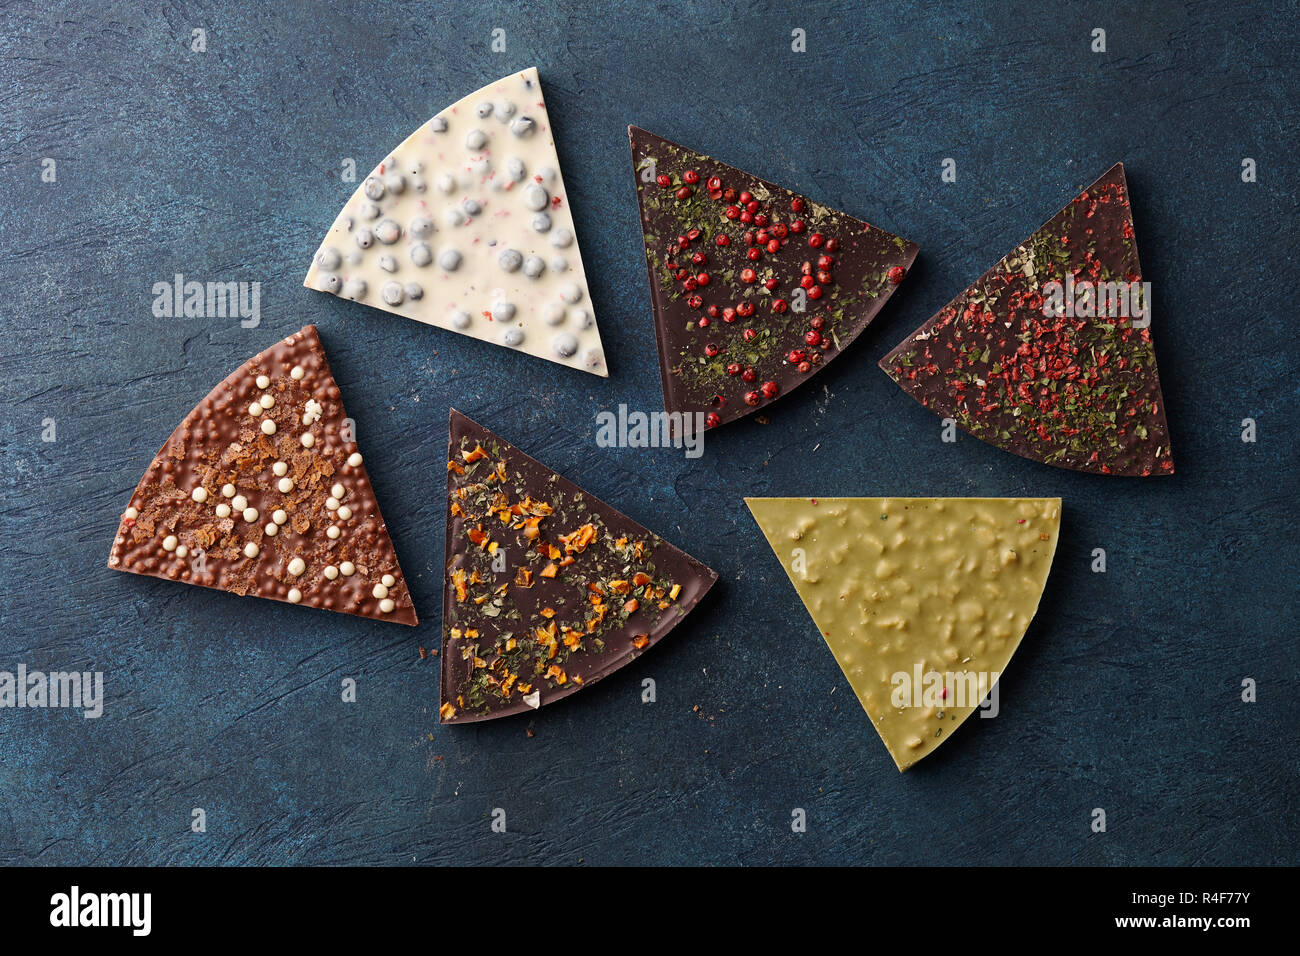 Chocolate triangle shaped pieces with diverse kinds of toppings on blue background, top view Stock Photo